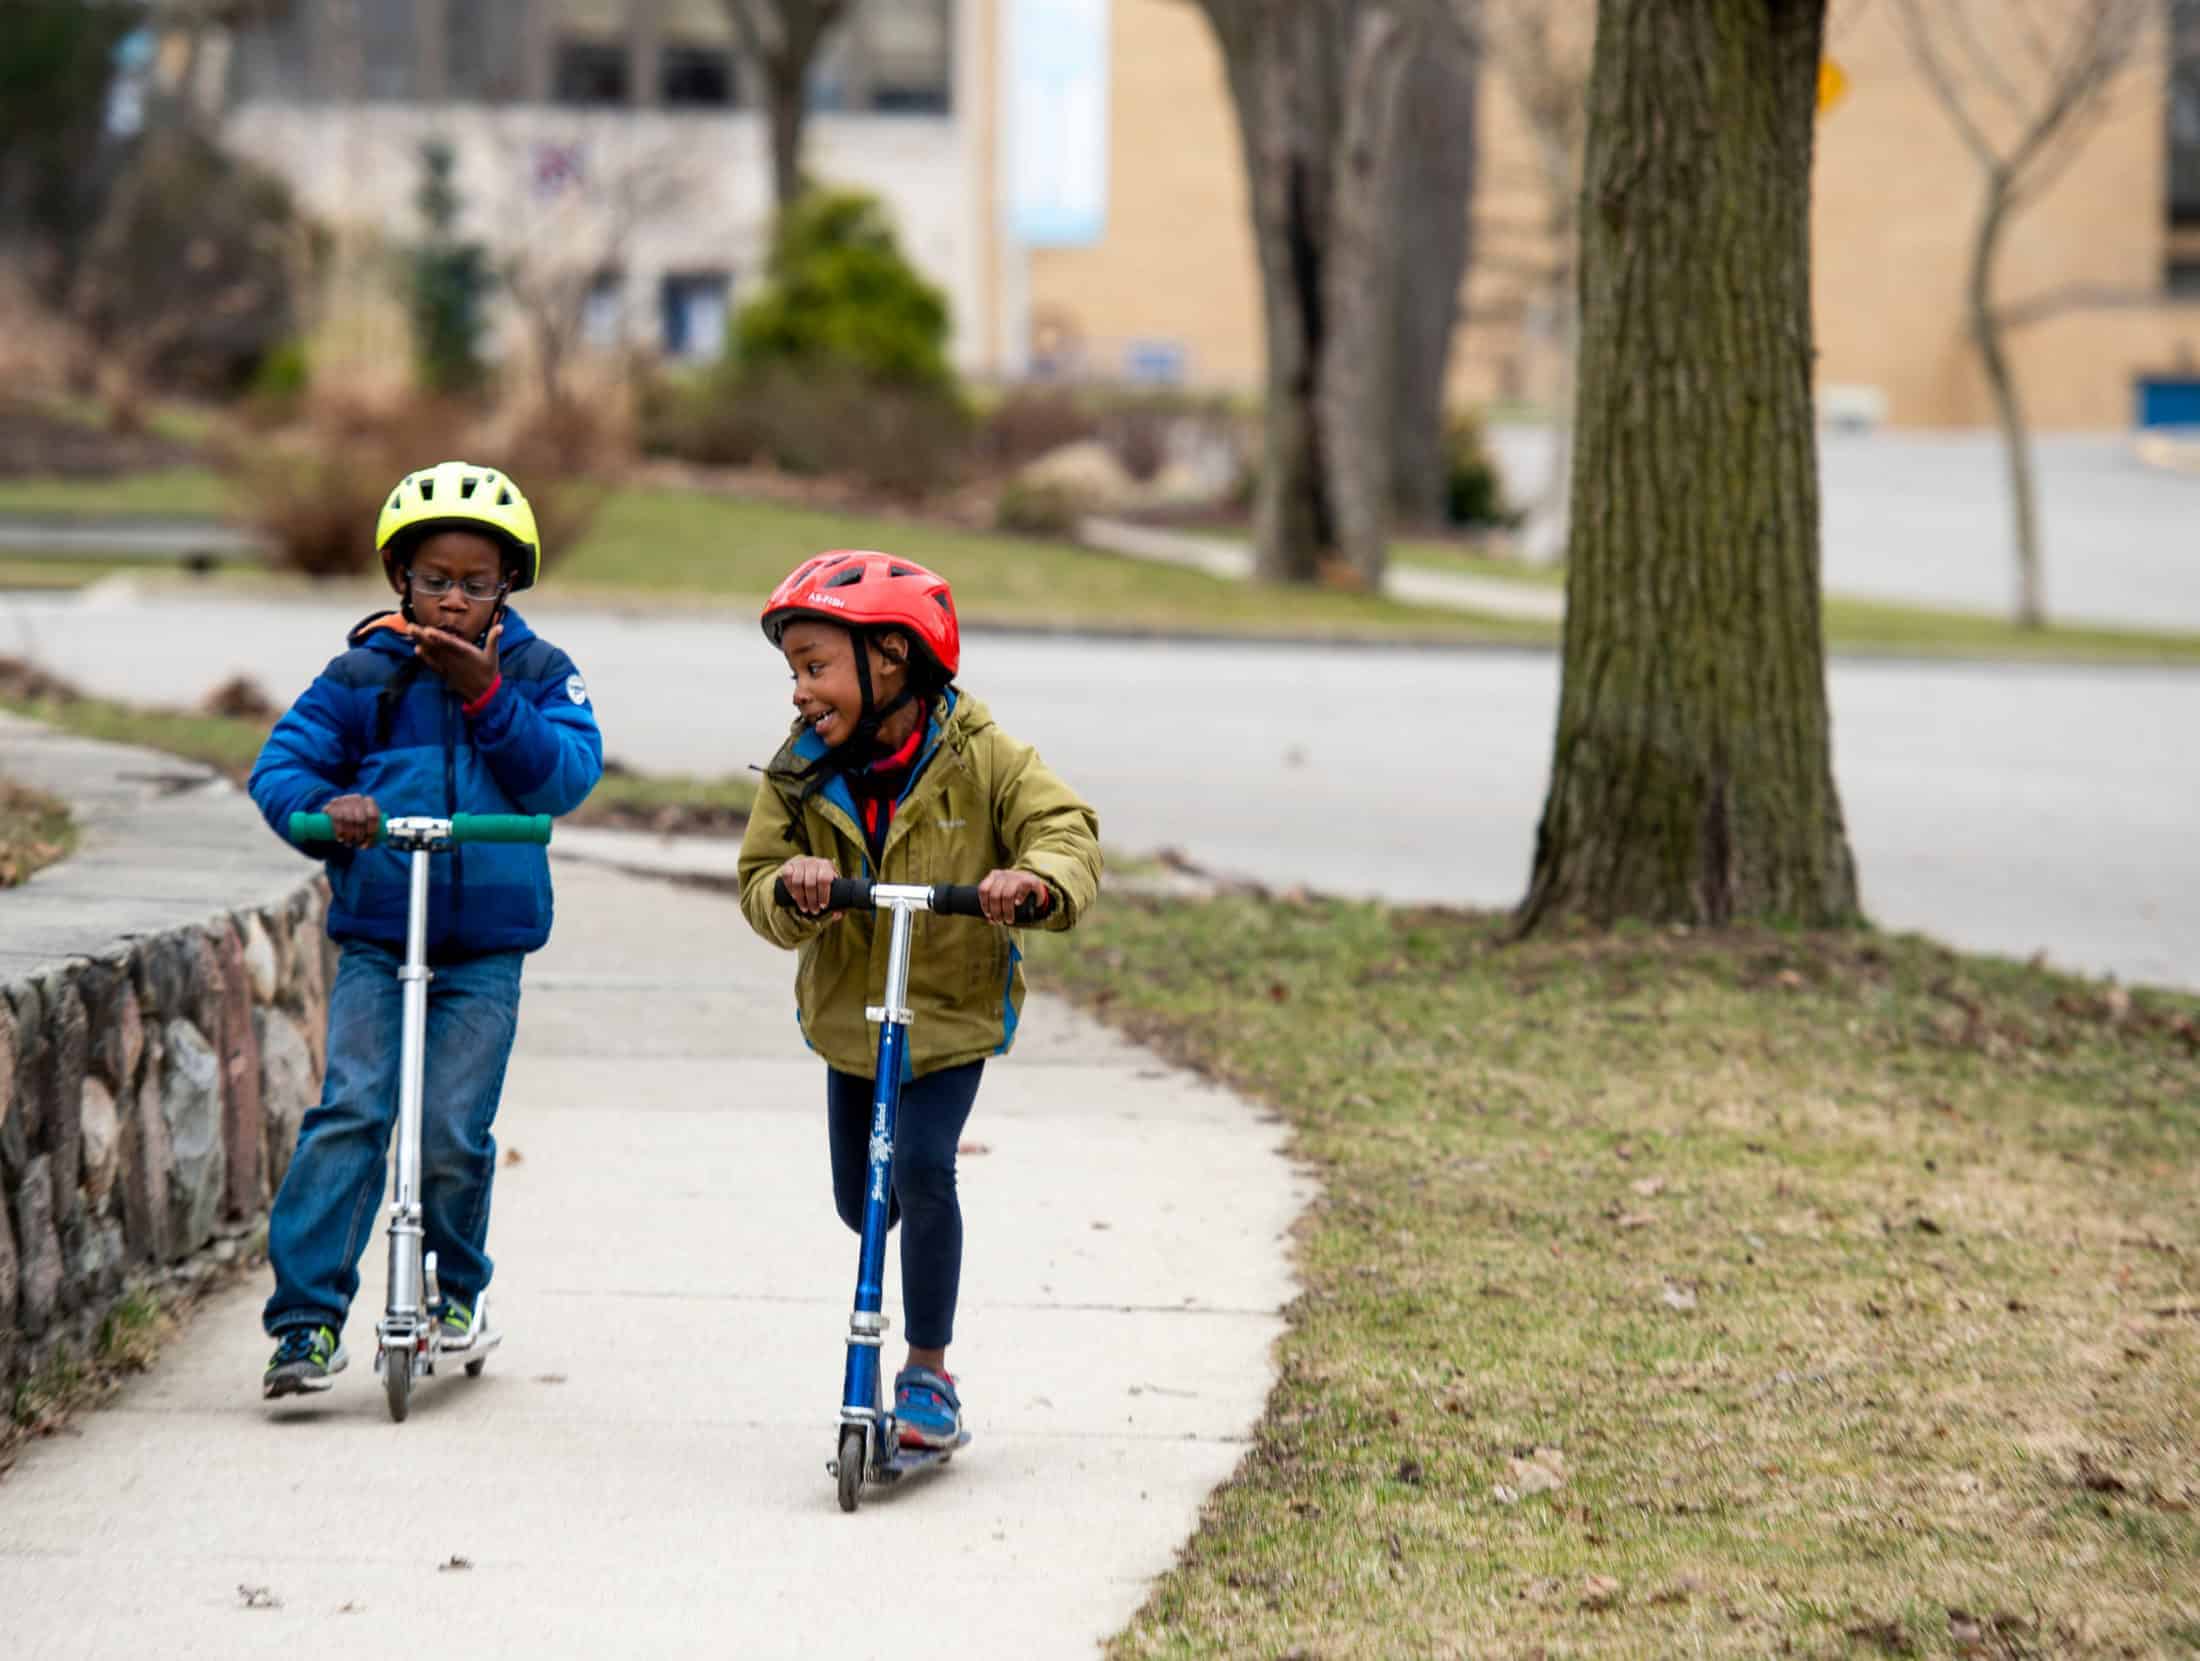 Two young children on scooters in Ann Arbor